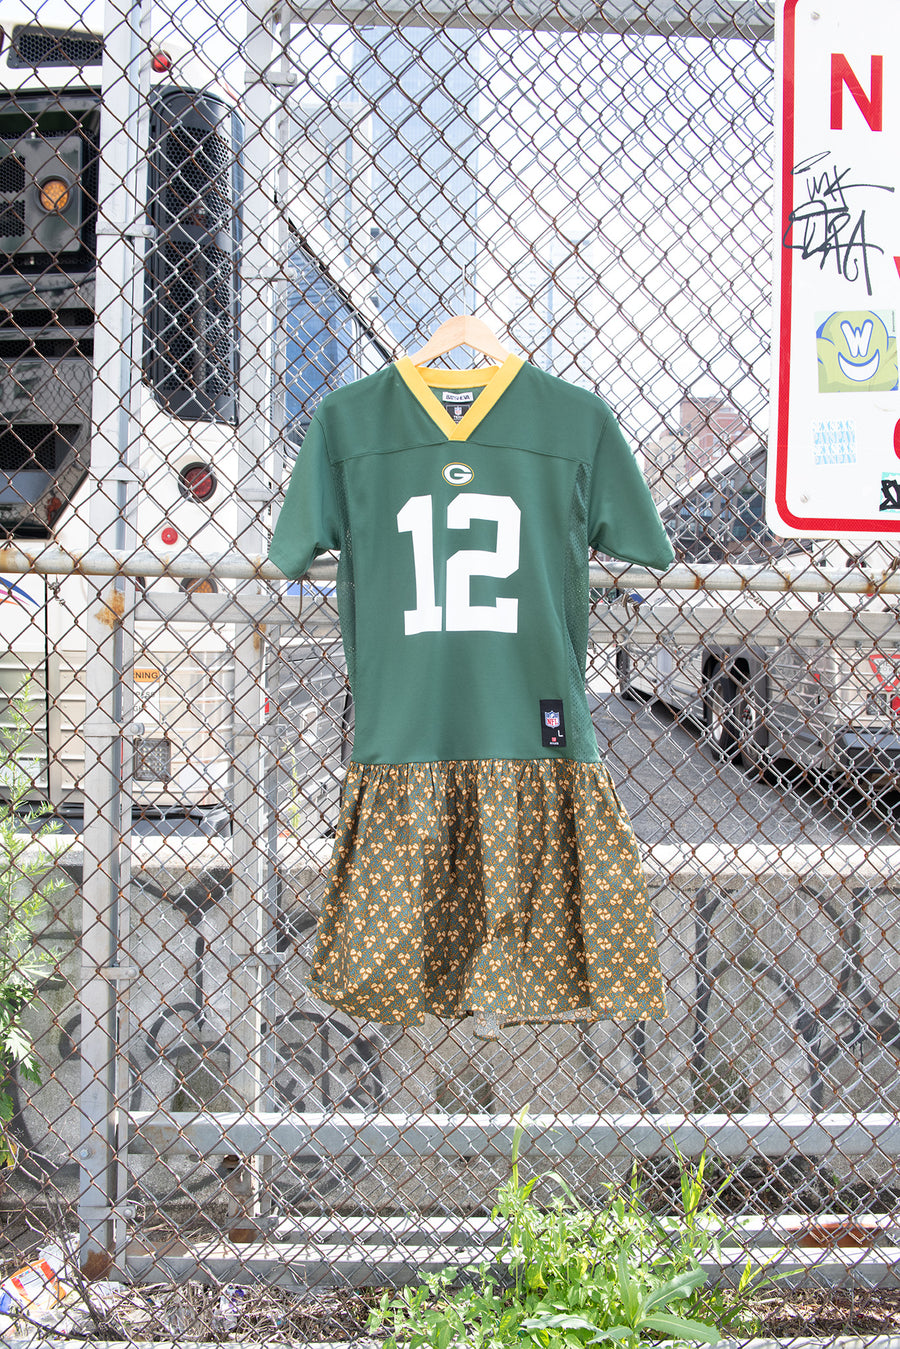 One-of-a-Kind Vintage Green Bay Packers Jersey Dress